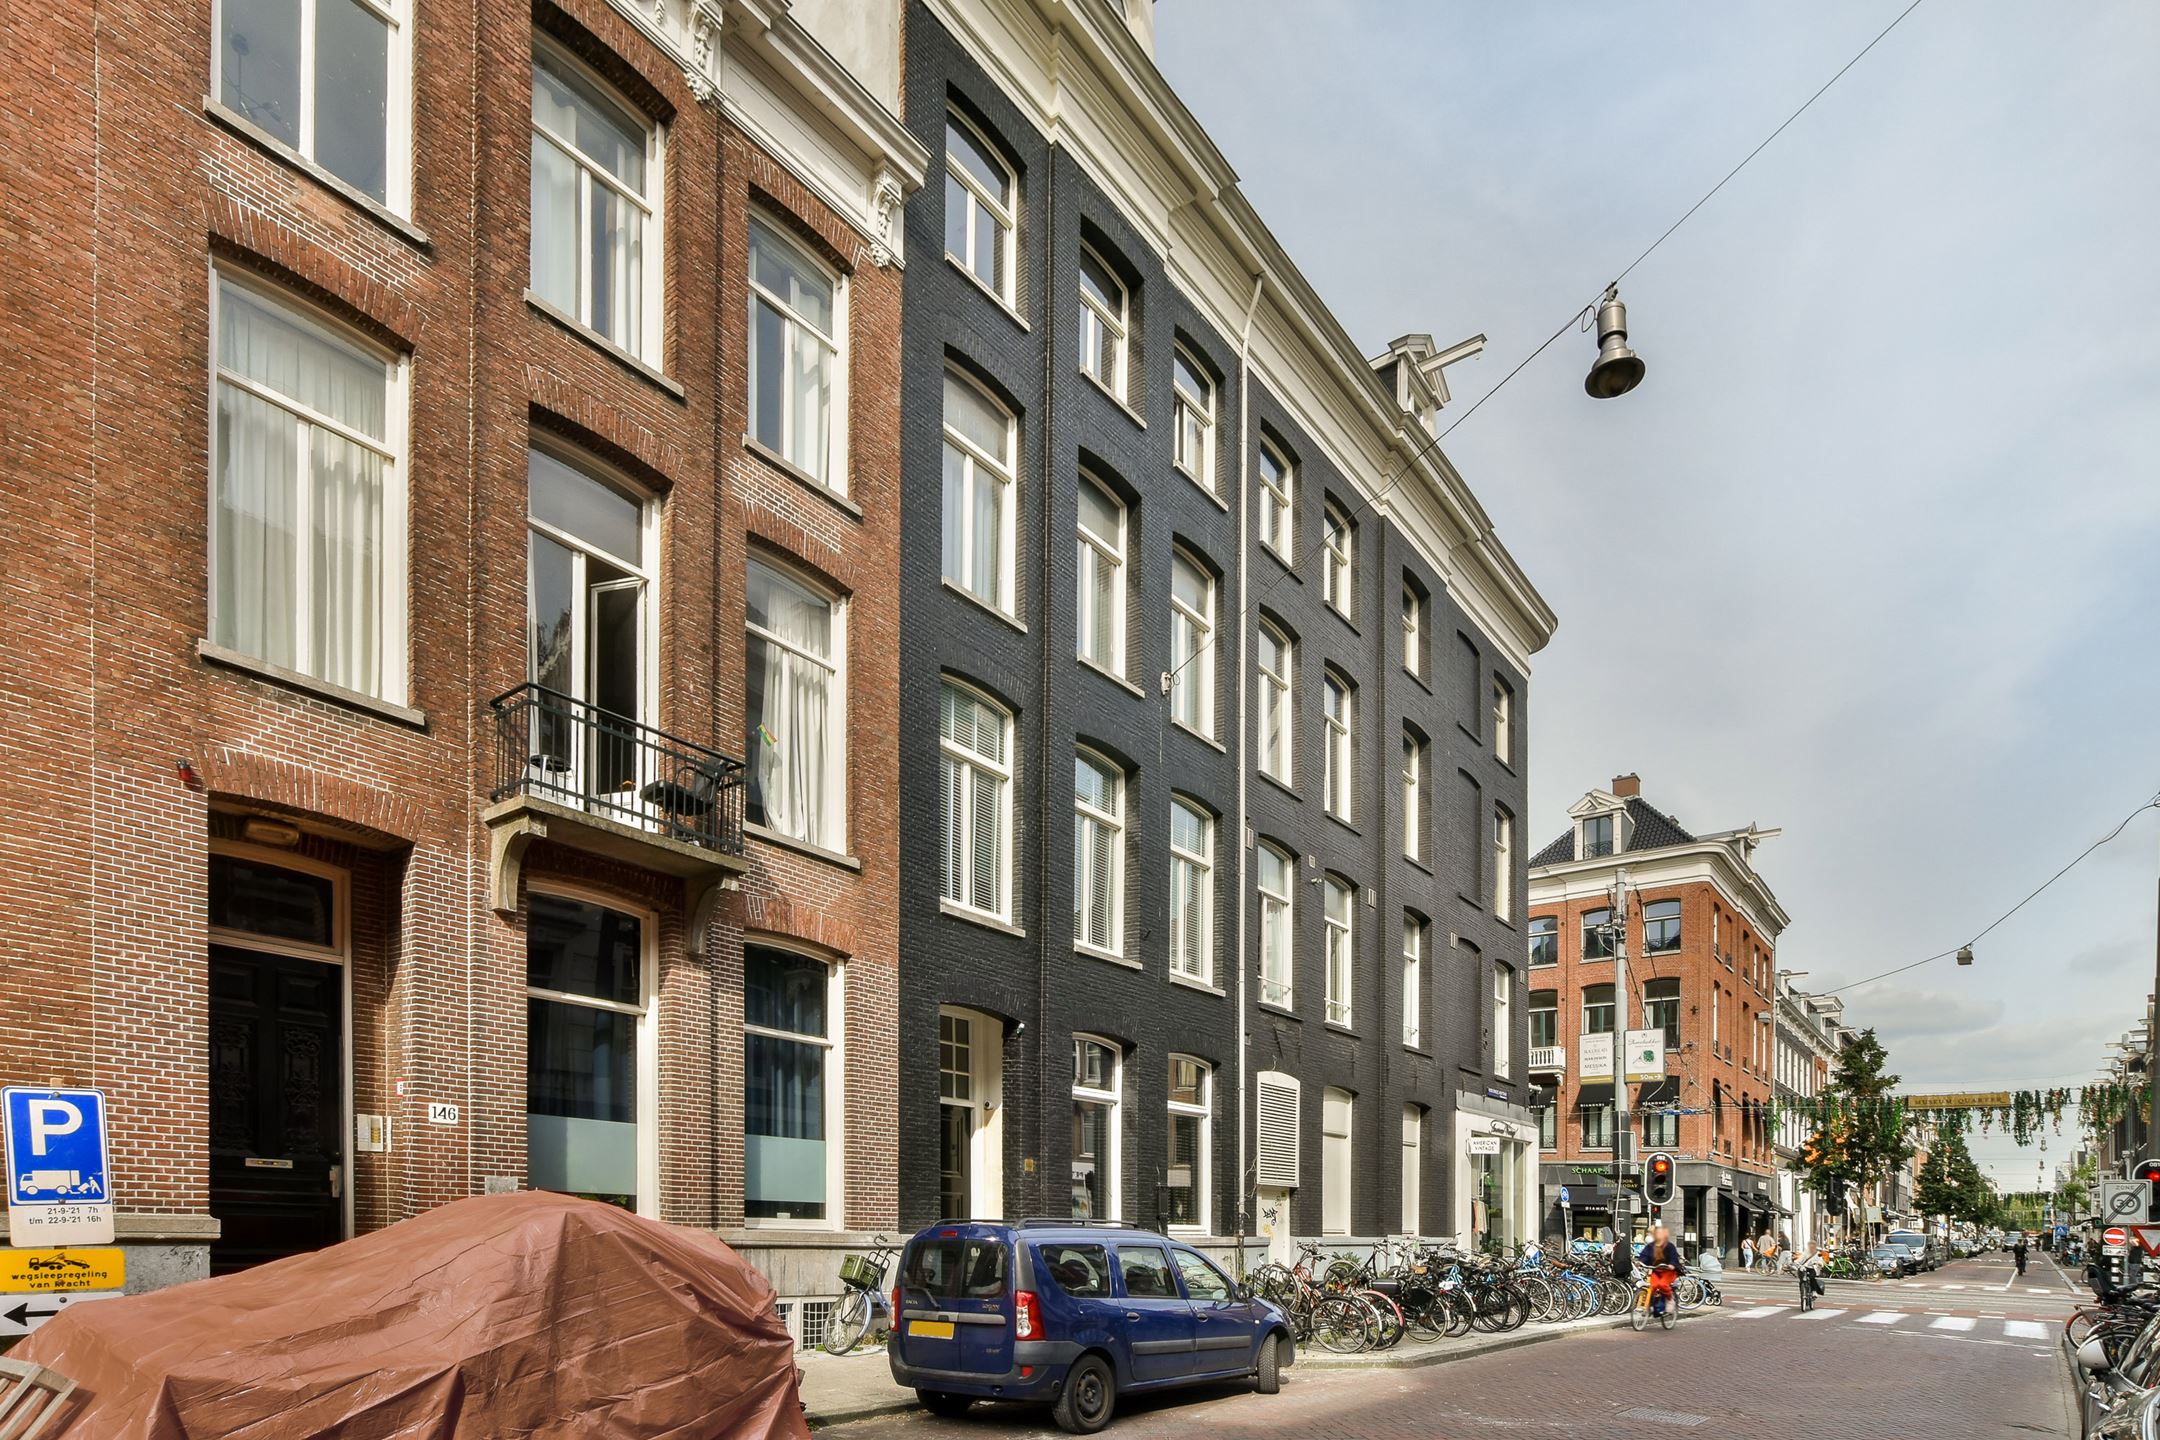 Luxury apartment in Amsterdams most famous shopping street.